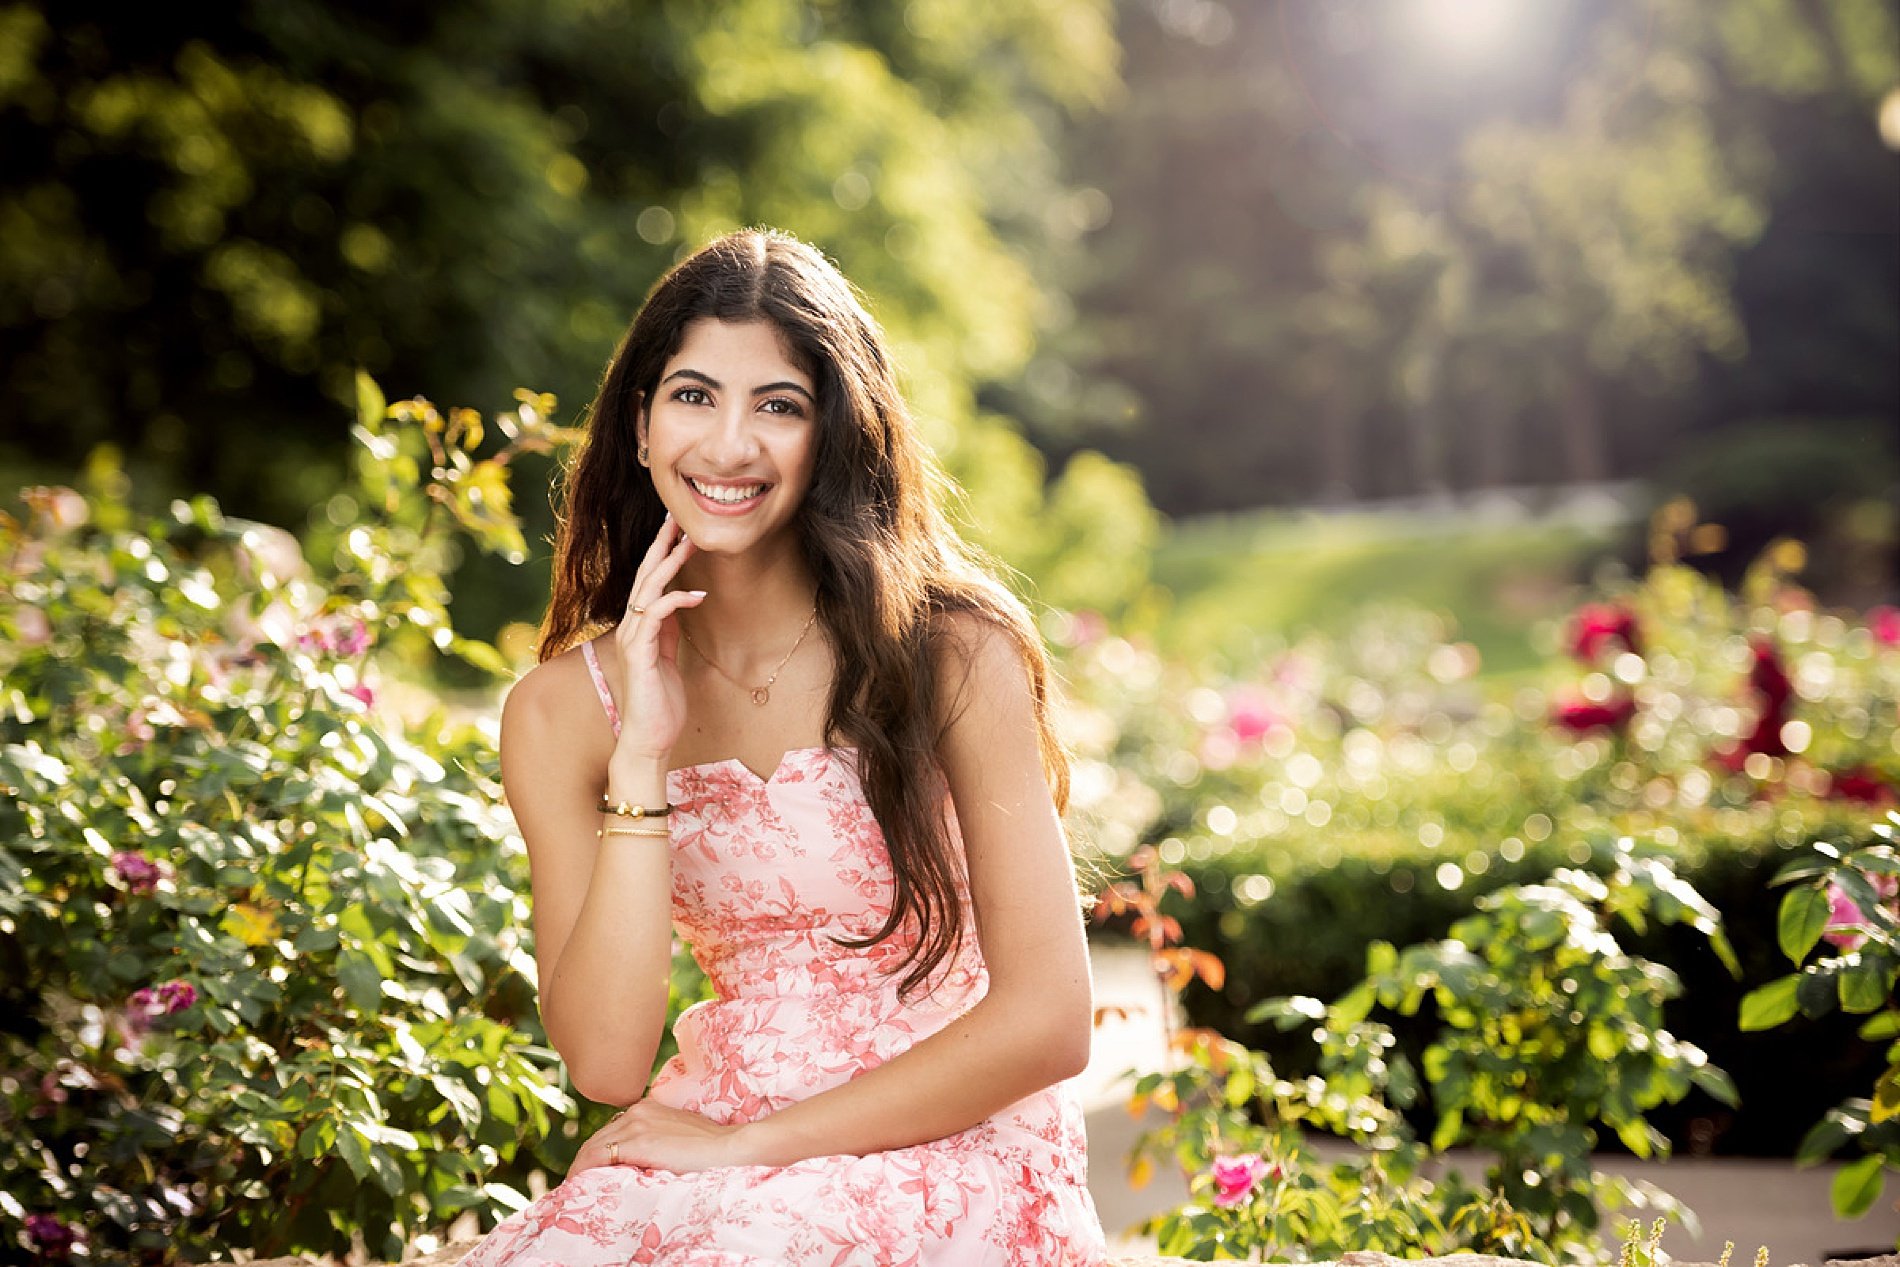  What Season is Right For Your Senior Session? Spring Senior session with flowers blooming in the background 